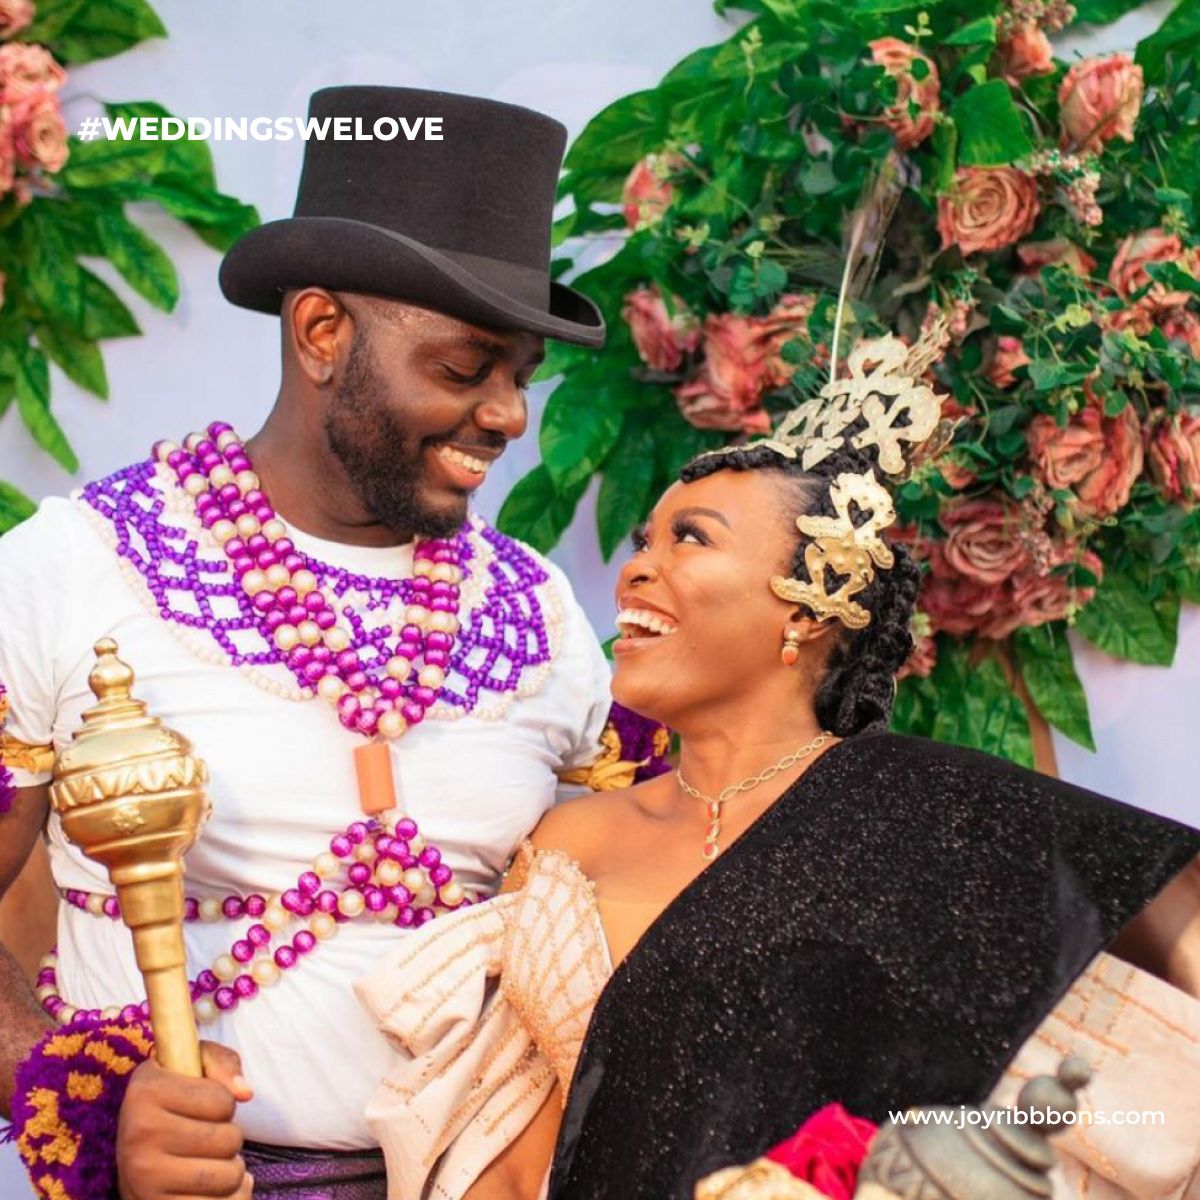 JoyRibbons is top gift registry site in Nigeria. Couples getting married in Nigeria today can receive gift on their wishlist, see RSVP and share their wedding information with their loved ones using JoyRibbons. We are the 
              company that will do everything and anything for love 